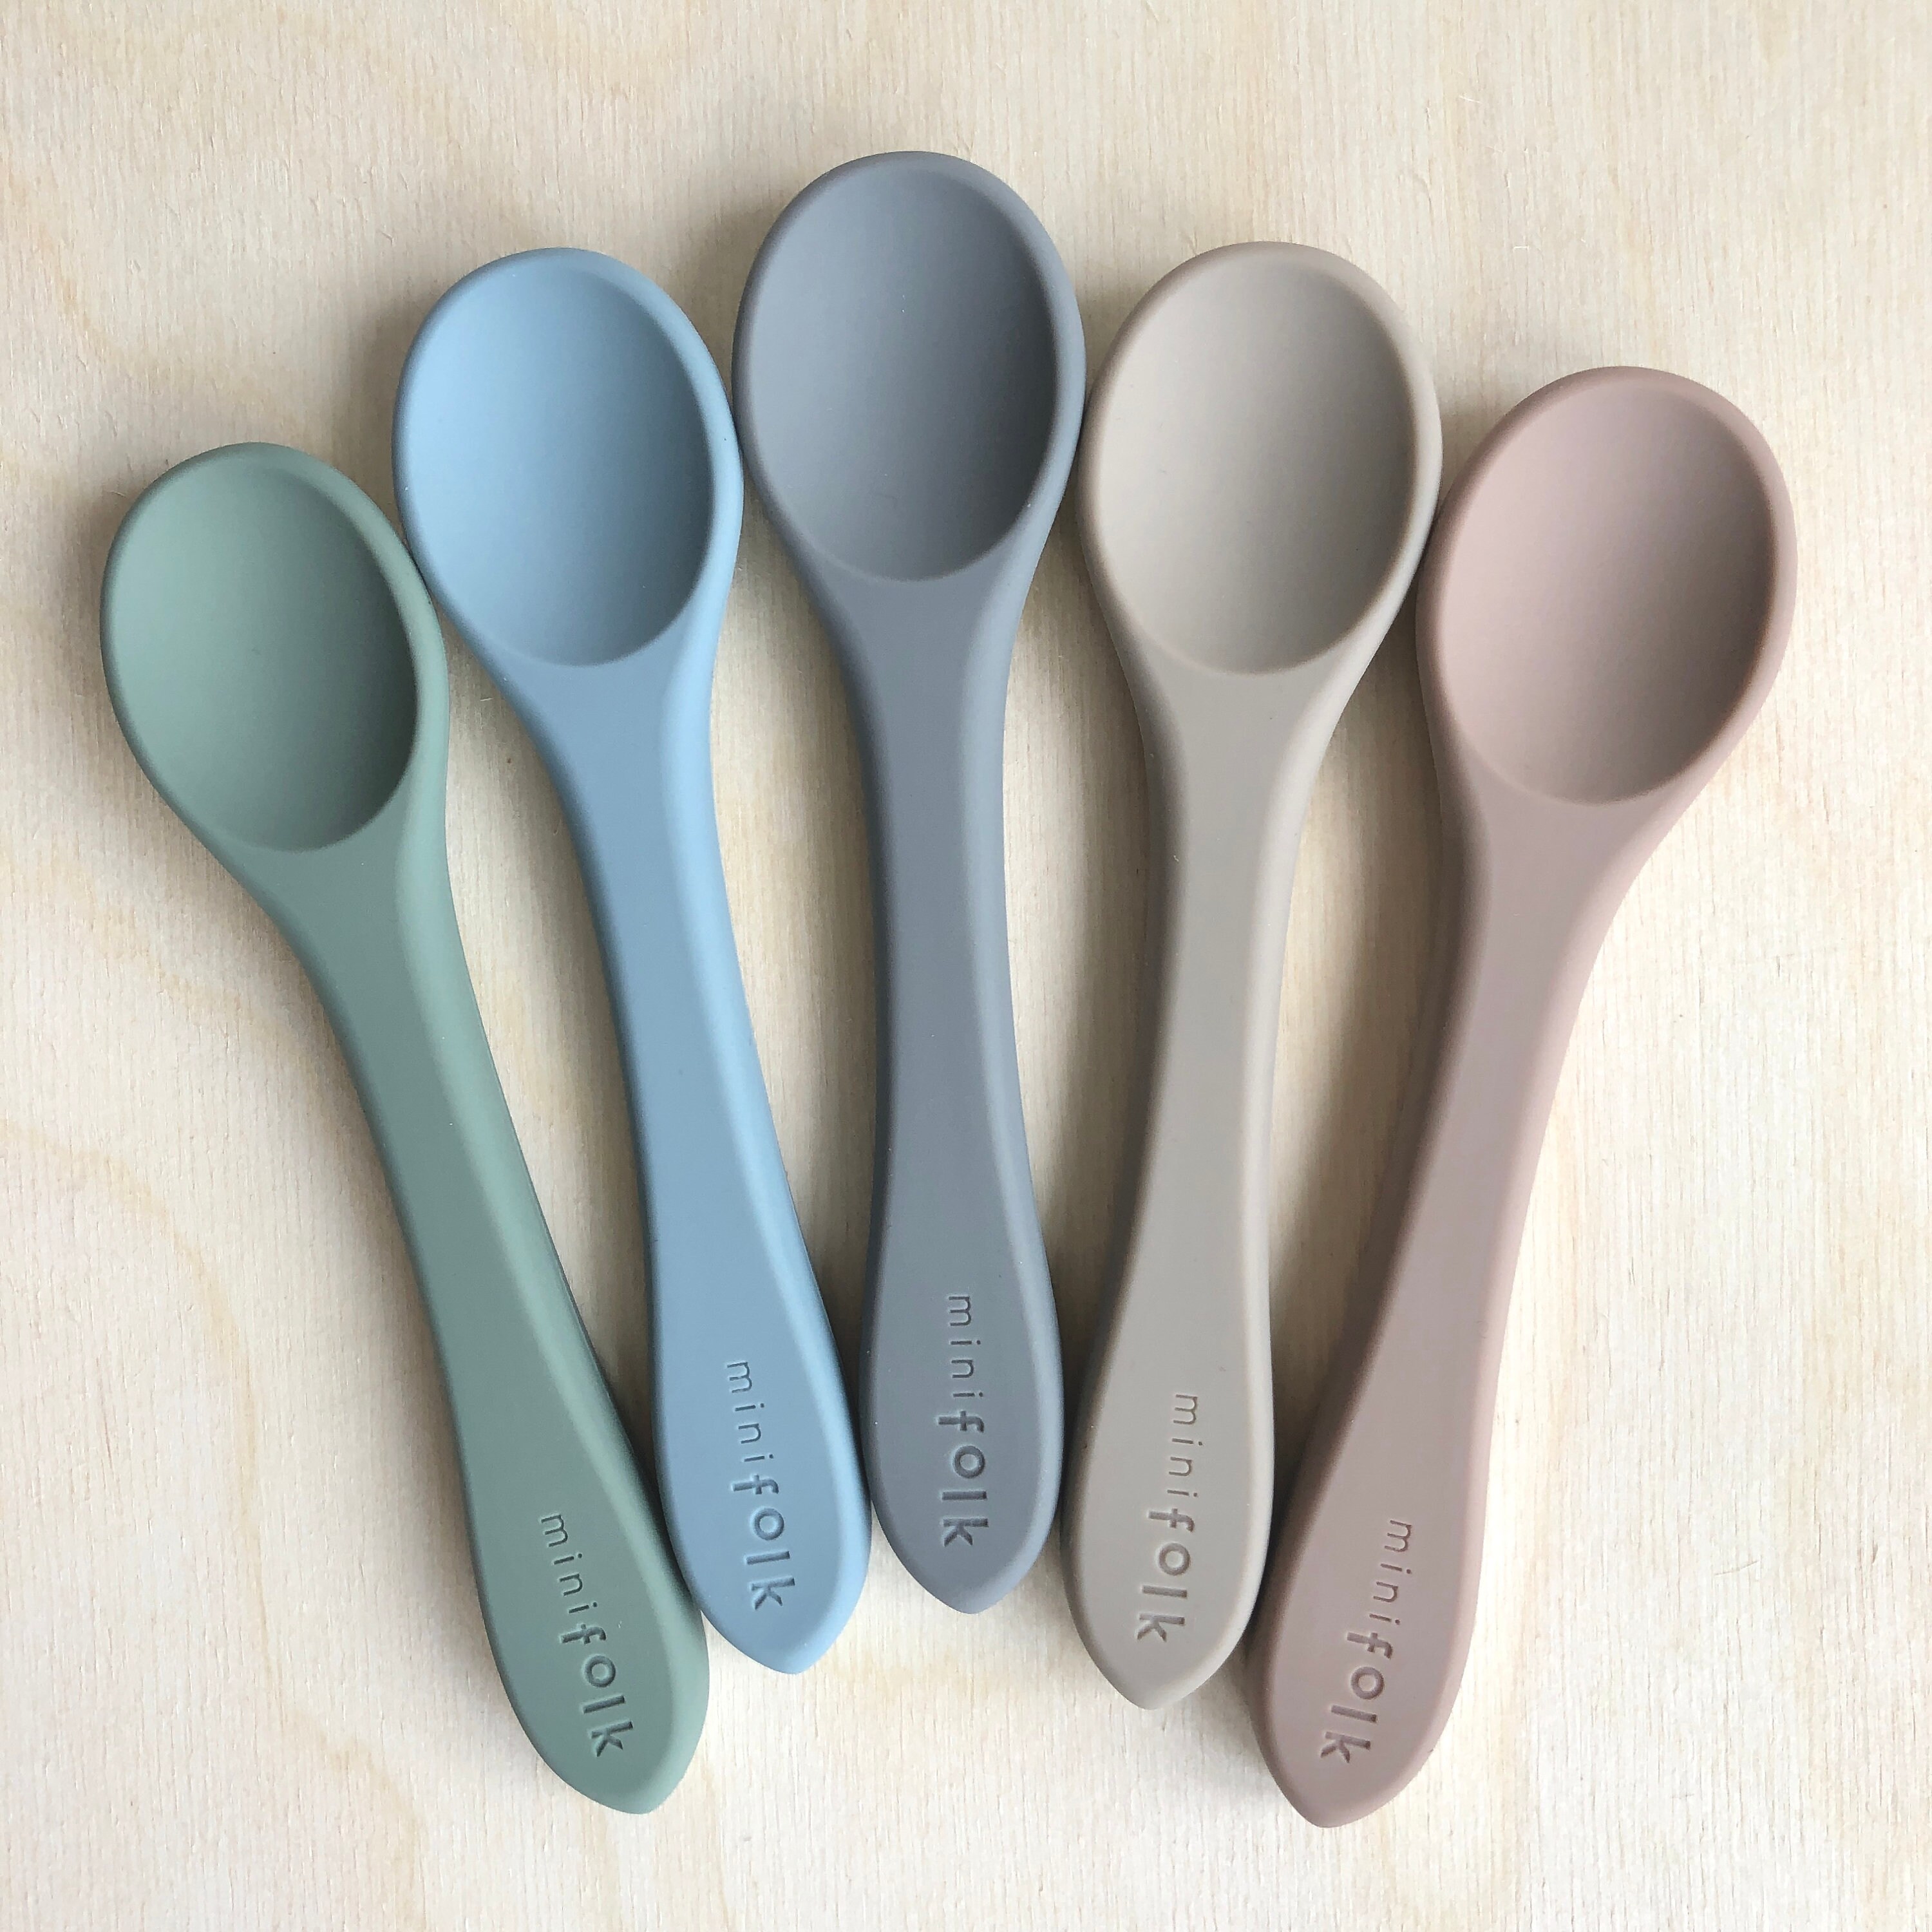 Minifolk Set of Silicone Weaning Spoons First Spoon Easy Hold Flexible Soft Spoon  Baby Child Toddler Dishwasher Safe Nordic Tone 